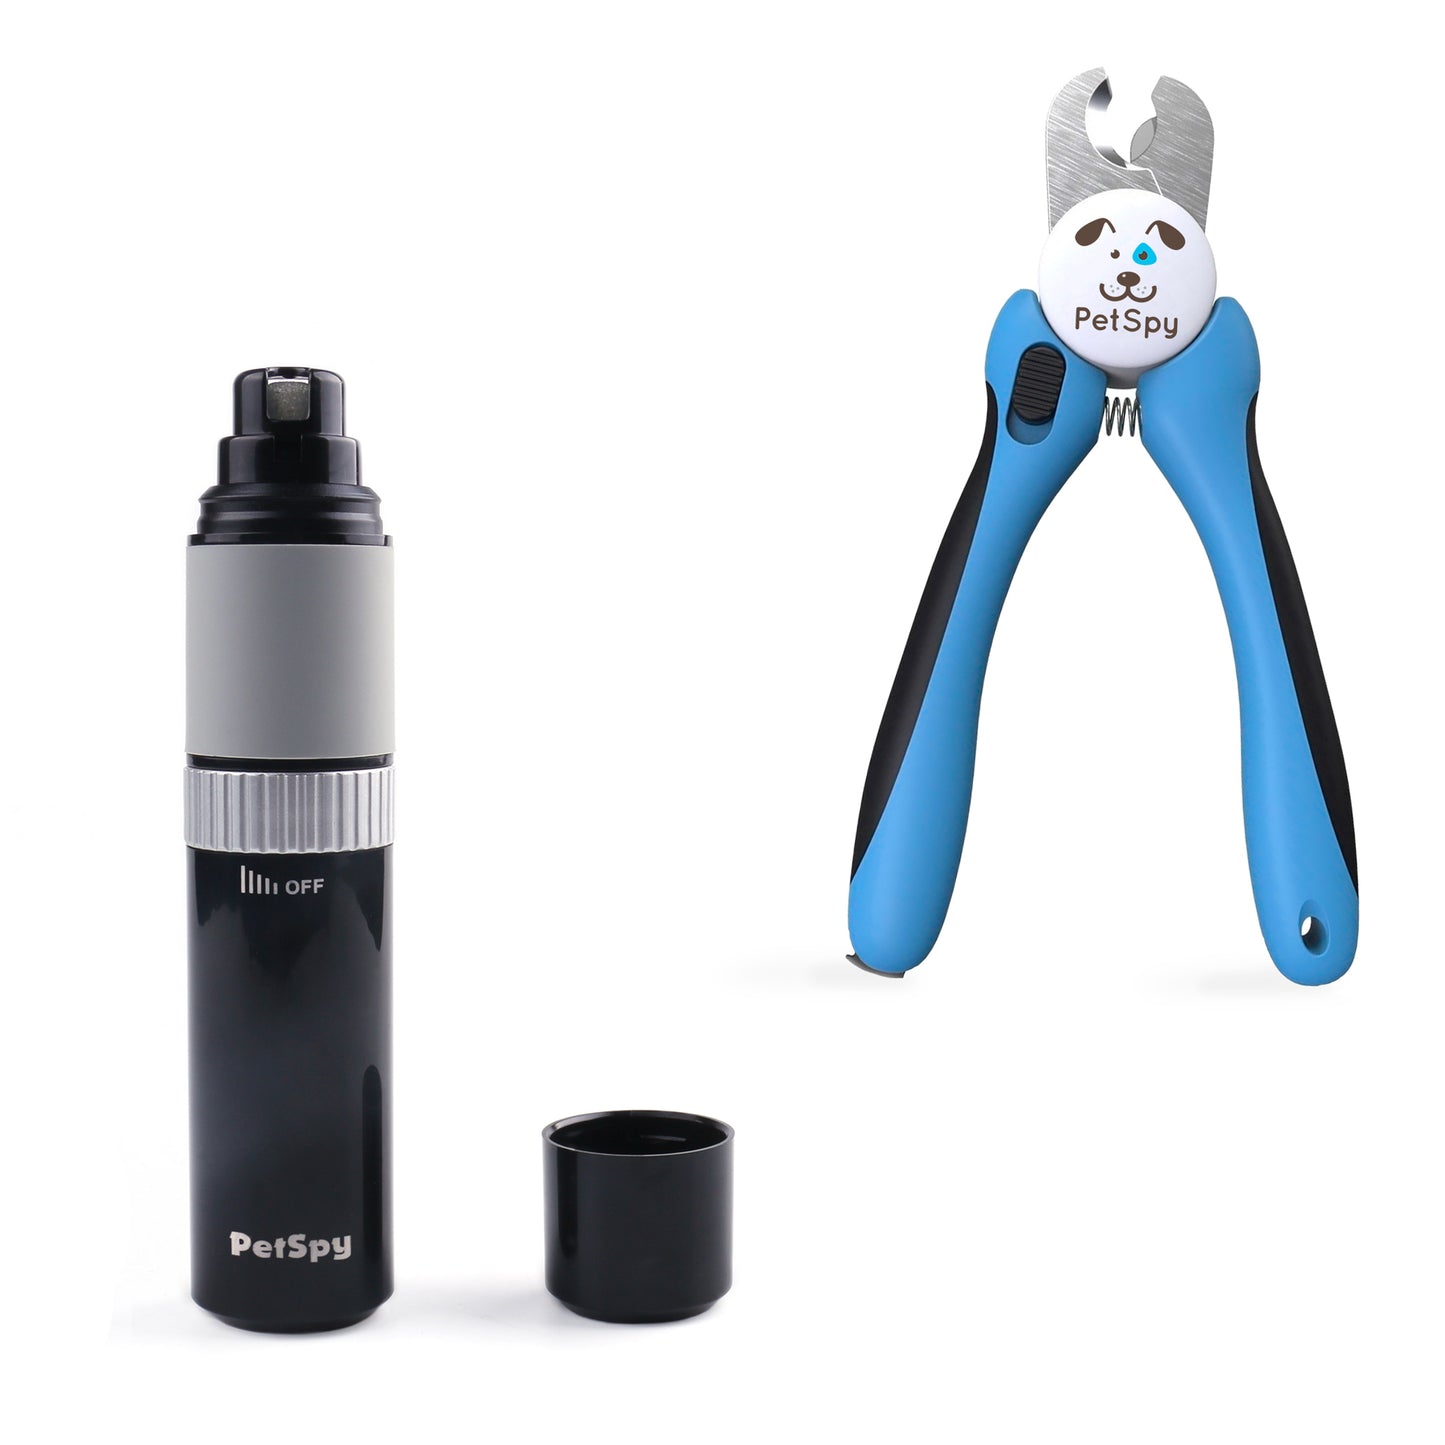 Painless dog nail clippers & Nail Grinder - Clipper Bundle